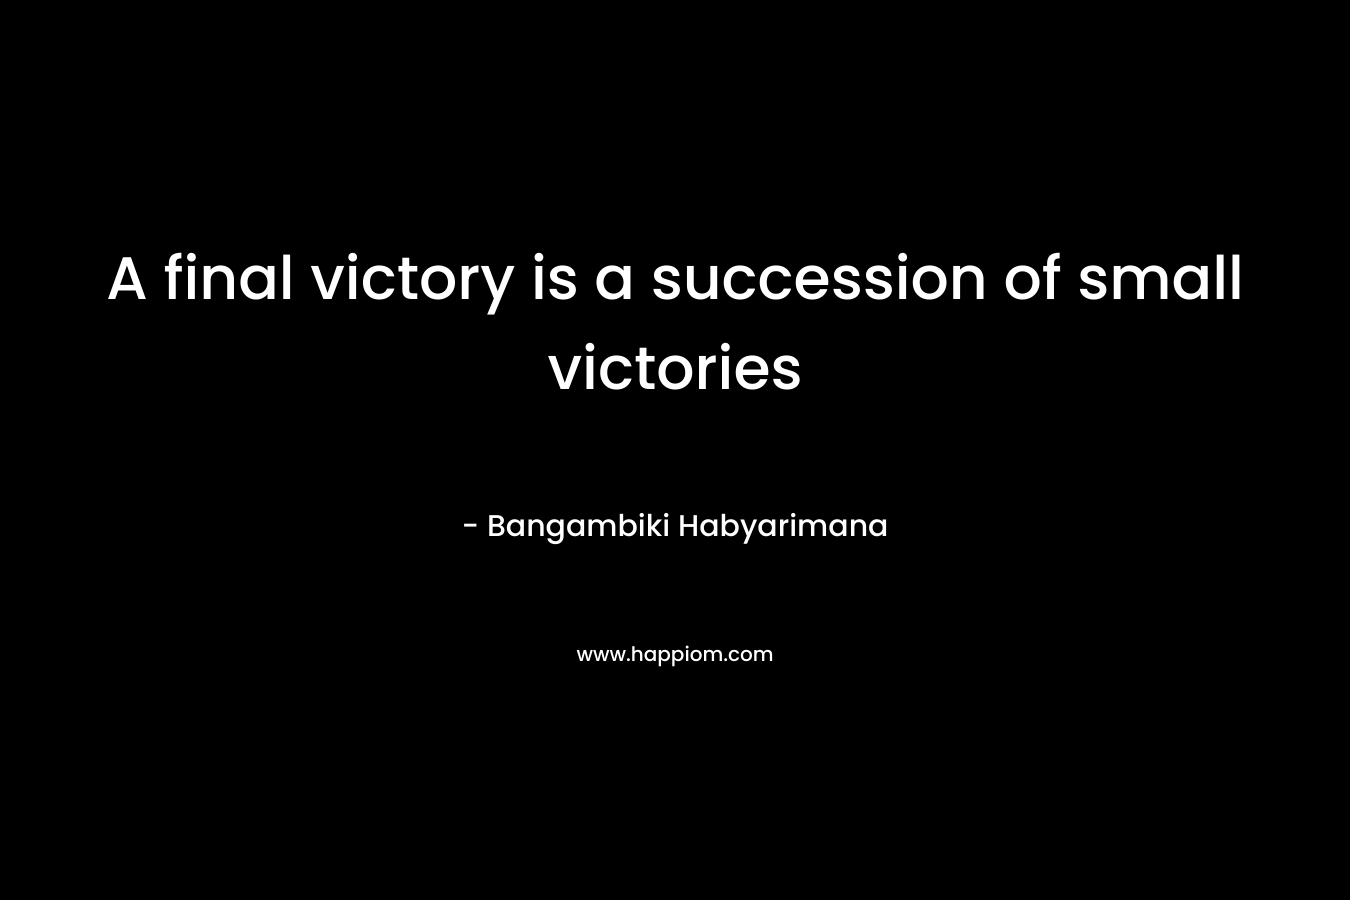 A final victory is a succession of small victories